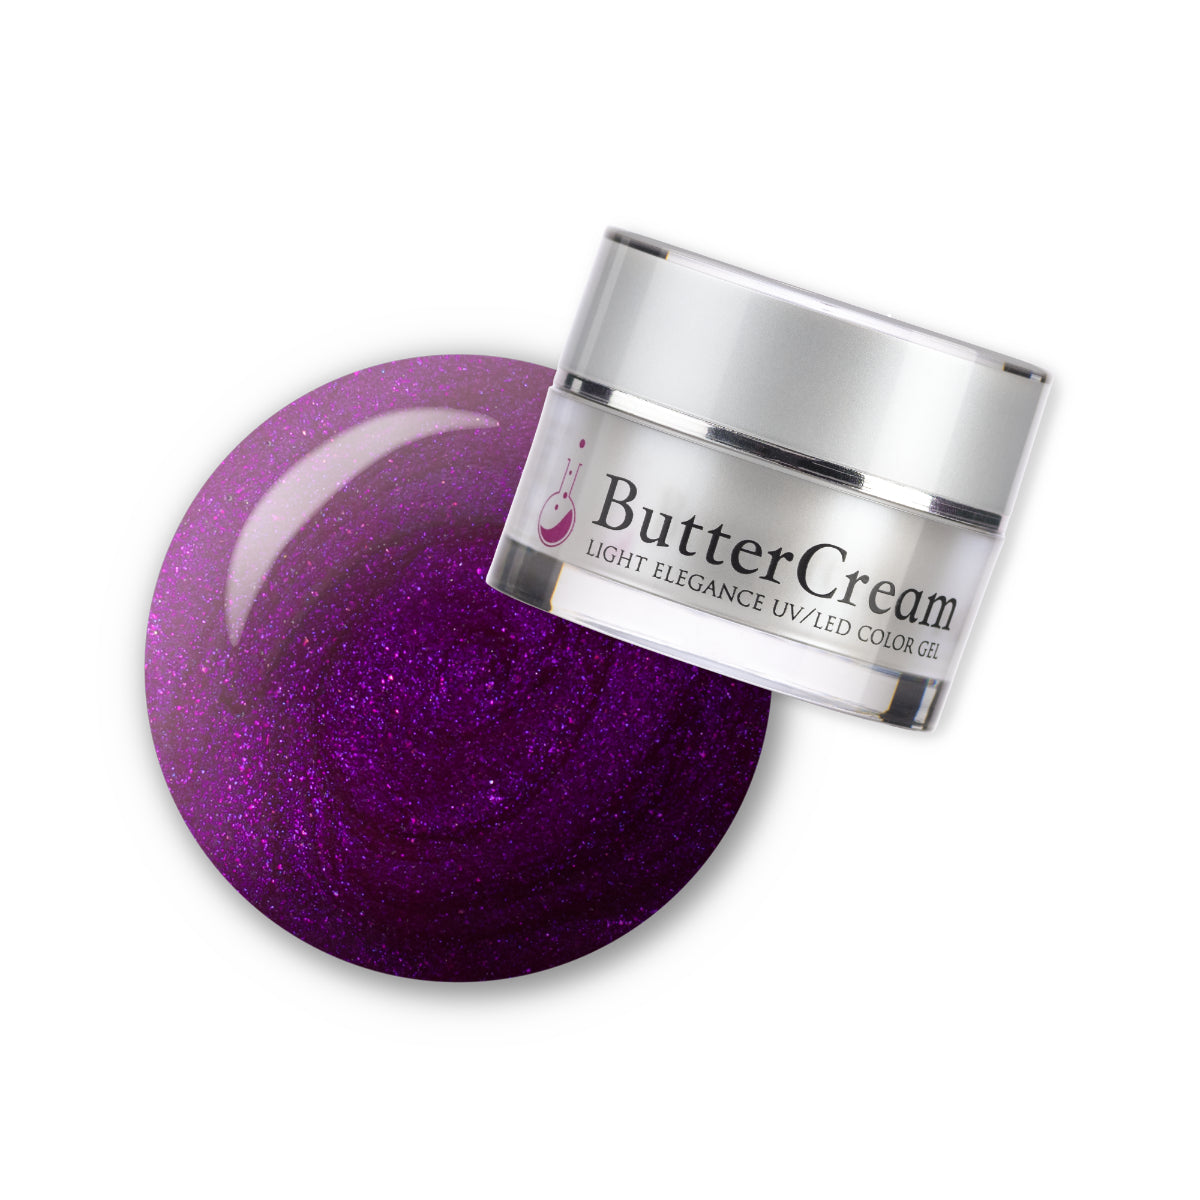 Light Elegance ButterCreams LED/UV - So Dramatic! :: New Packaging - Creata Beauty - Professional Beauty Products